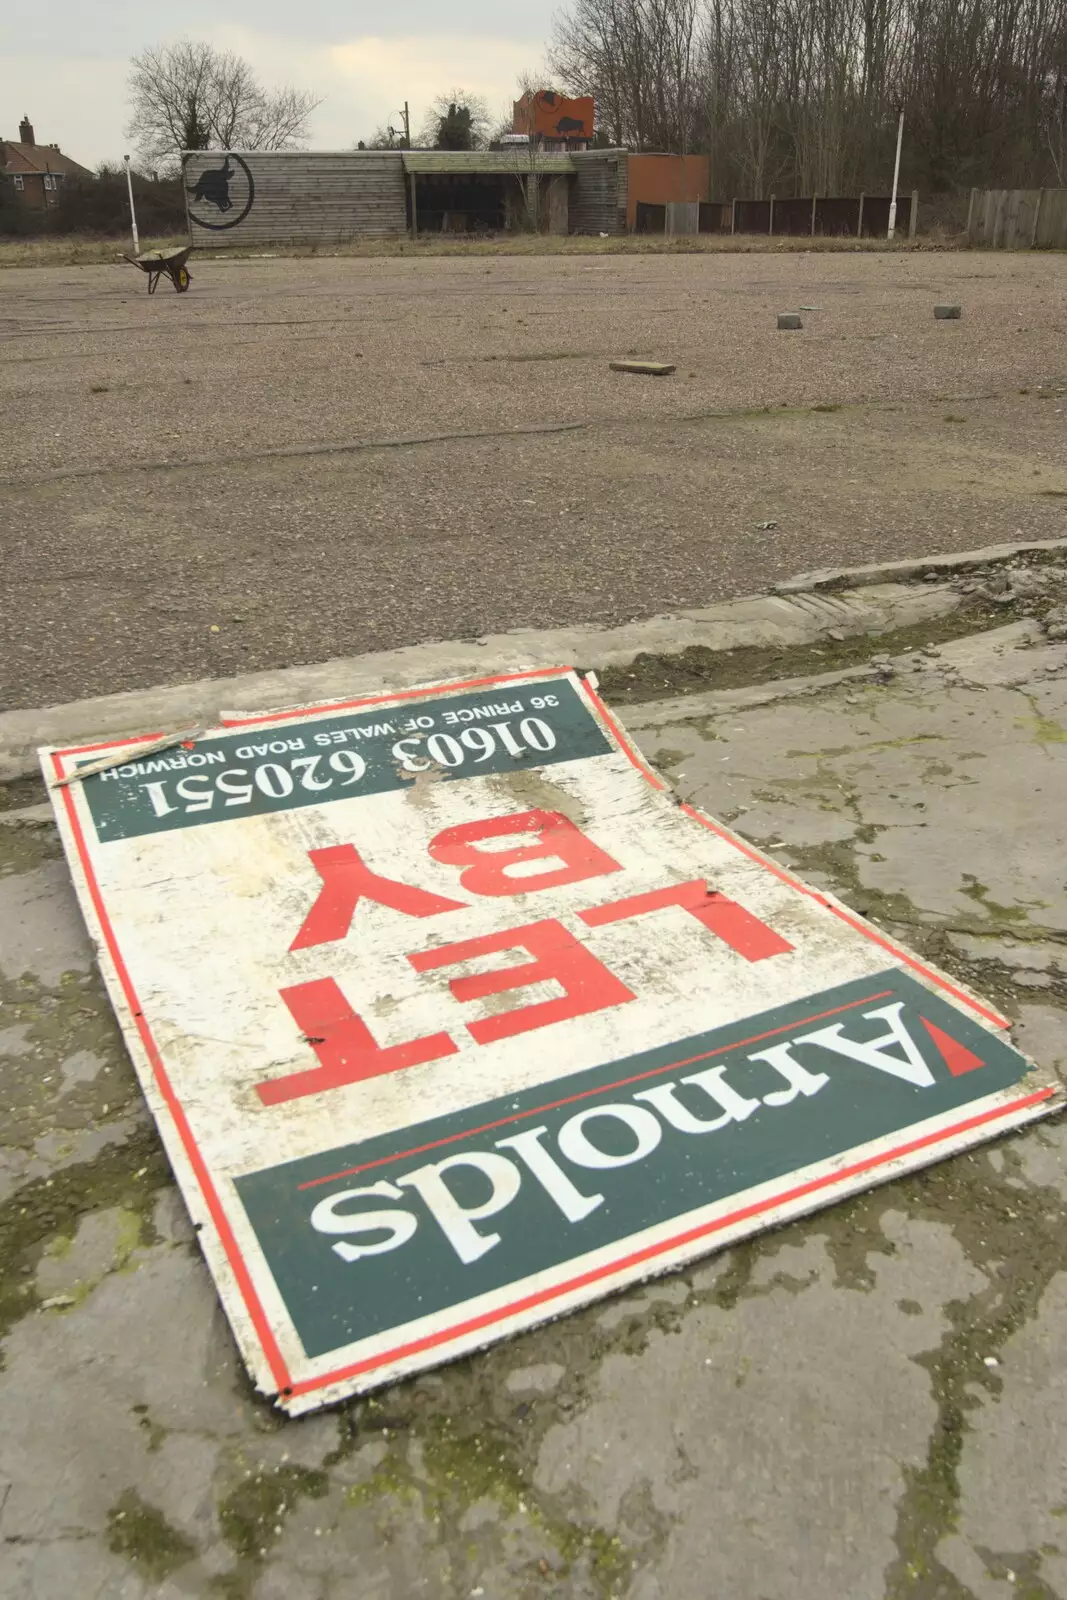 An optimistic 'Let By' sign, abandoned on the ground, from Science Park Demolition and the Derelict Ranch Diner, Cambridge and Tasburgh, Norfolk - 17th March 2010